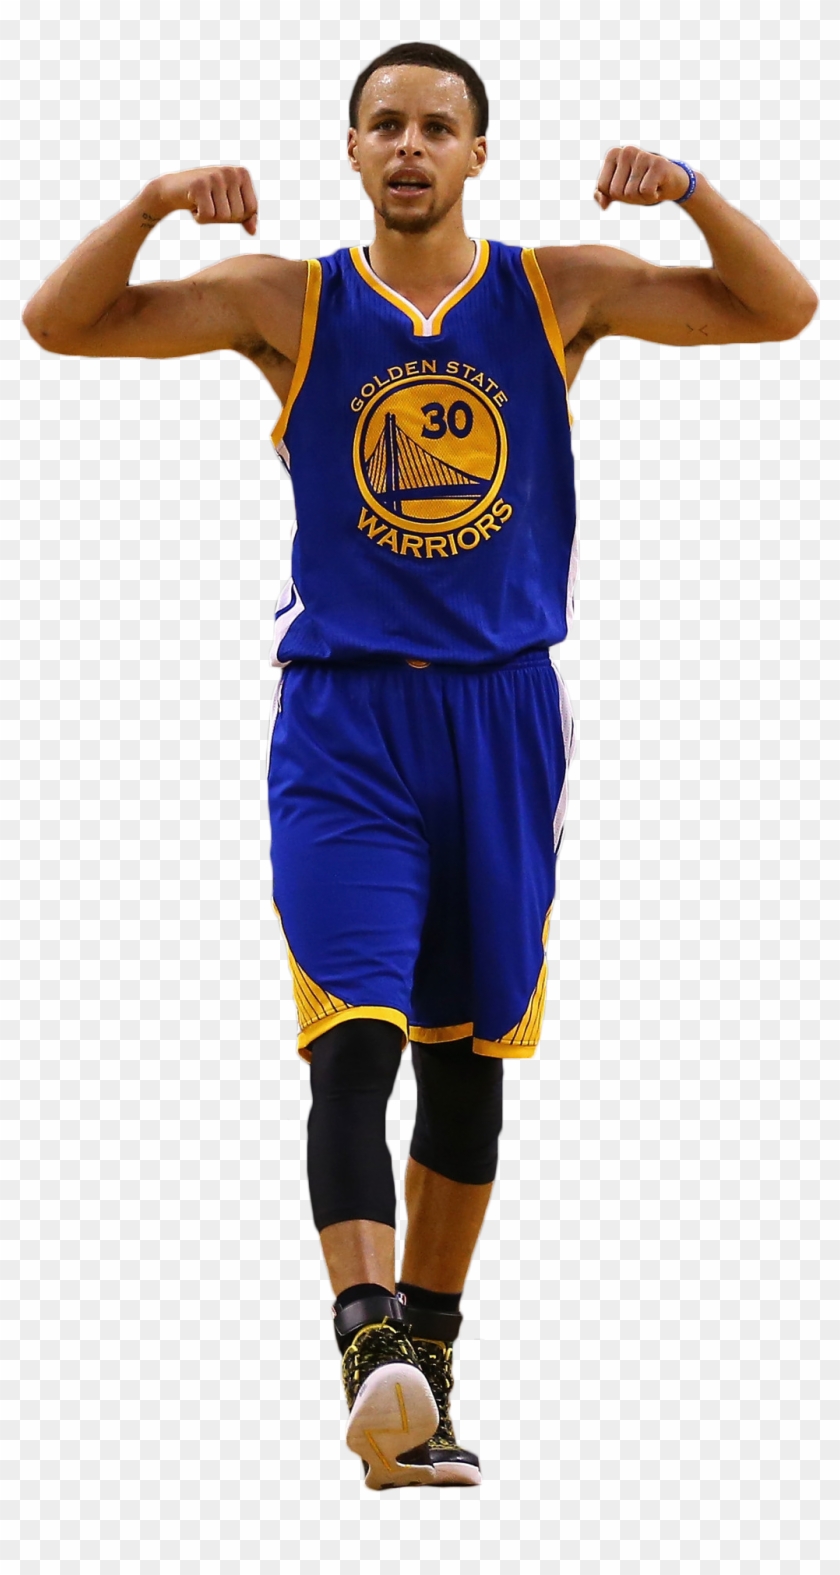 Stephen Curry Fathead Download - Stephen Curry #534521